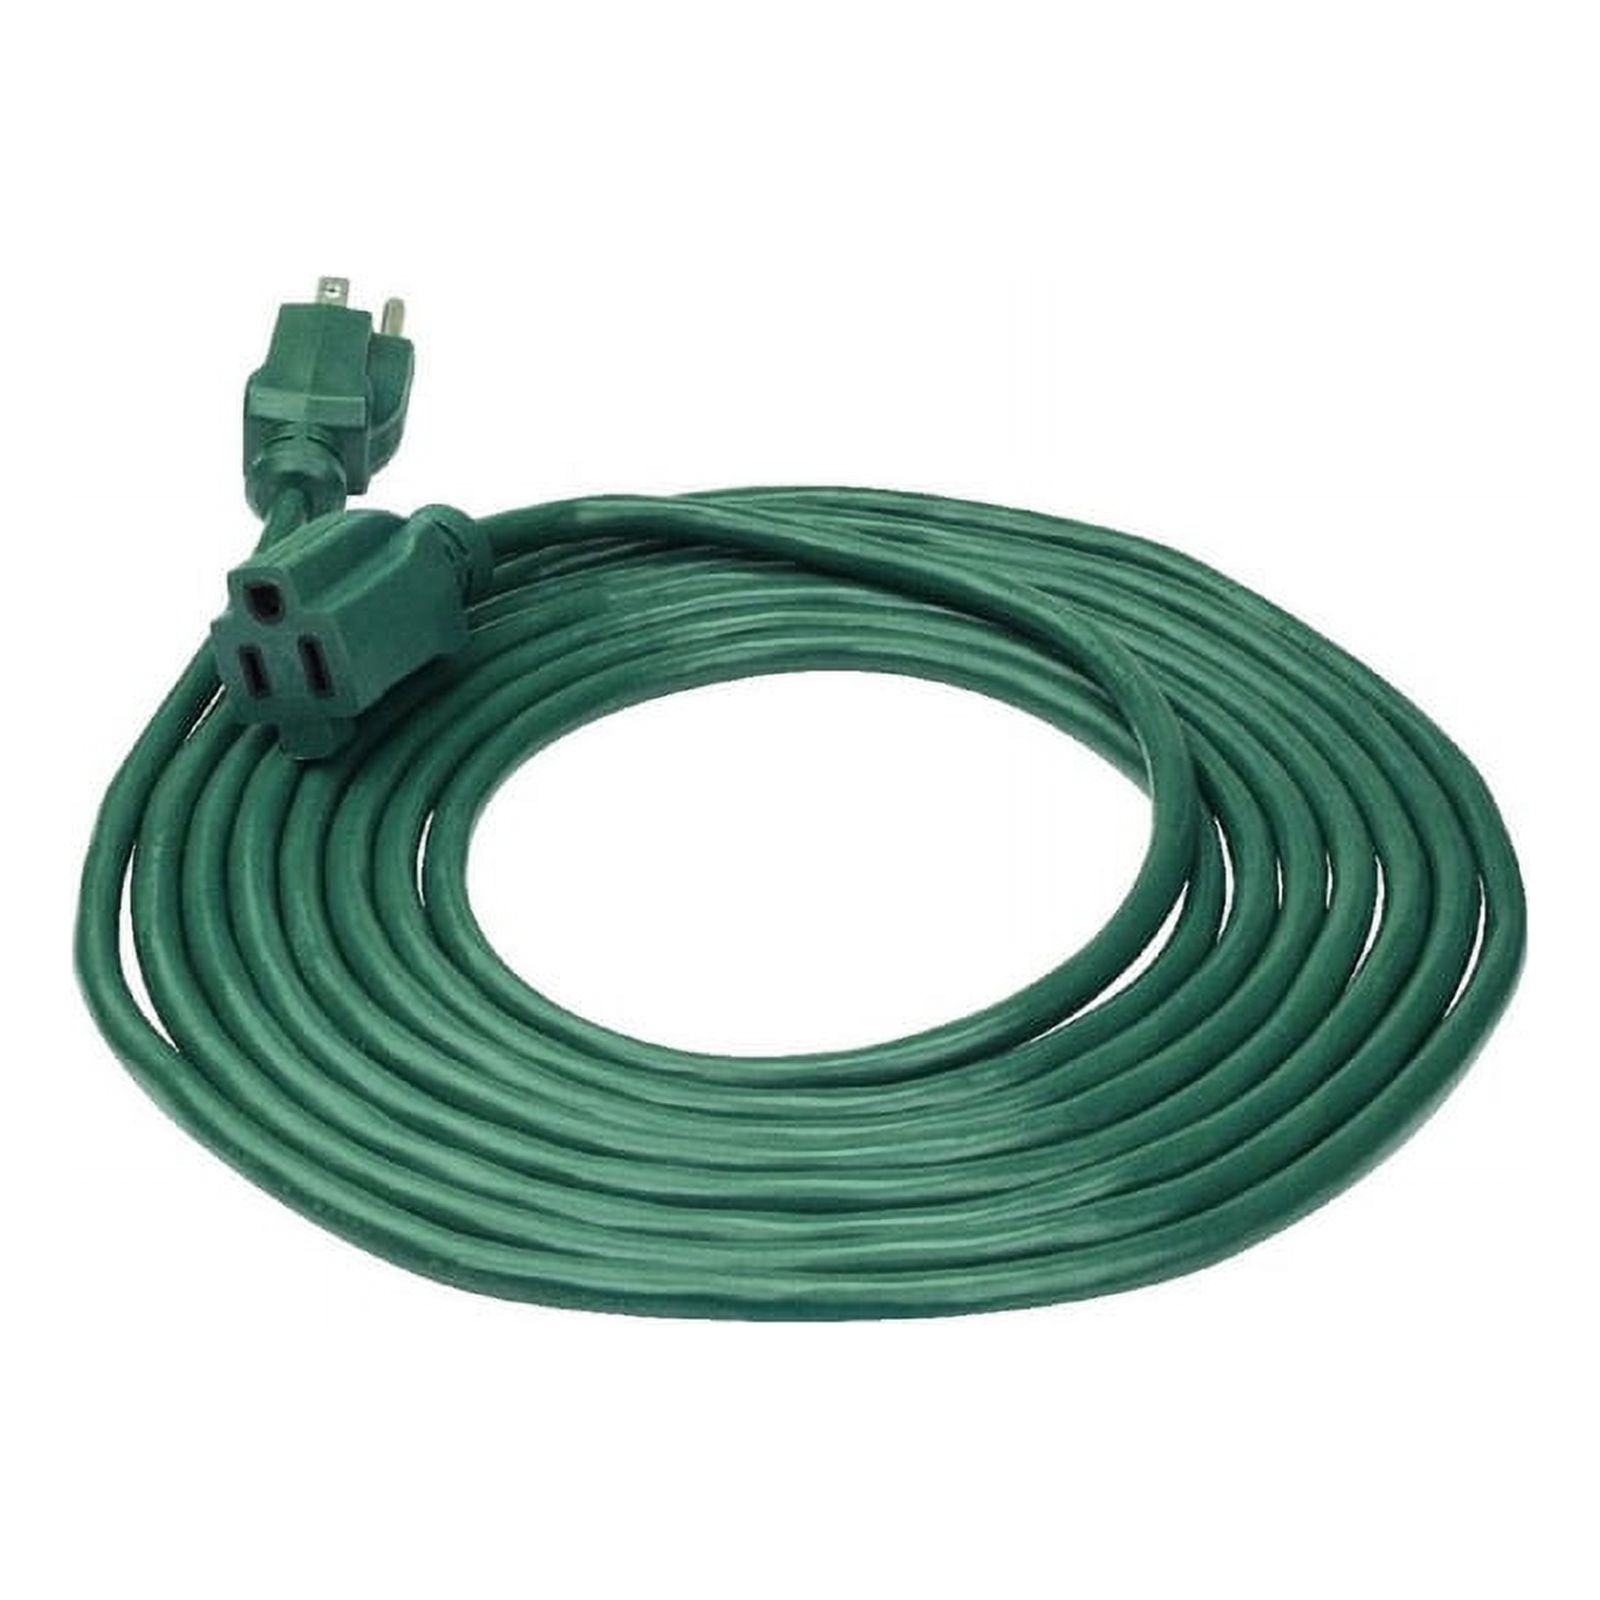 Prime EC880612 Green Extension Cord- 12 ft. - image 2 of 2